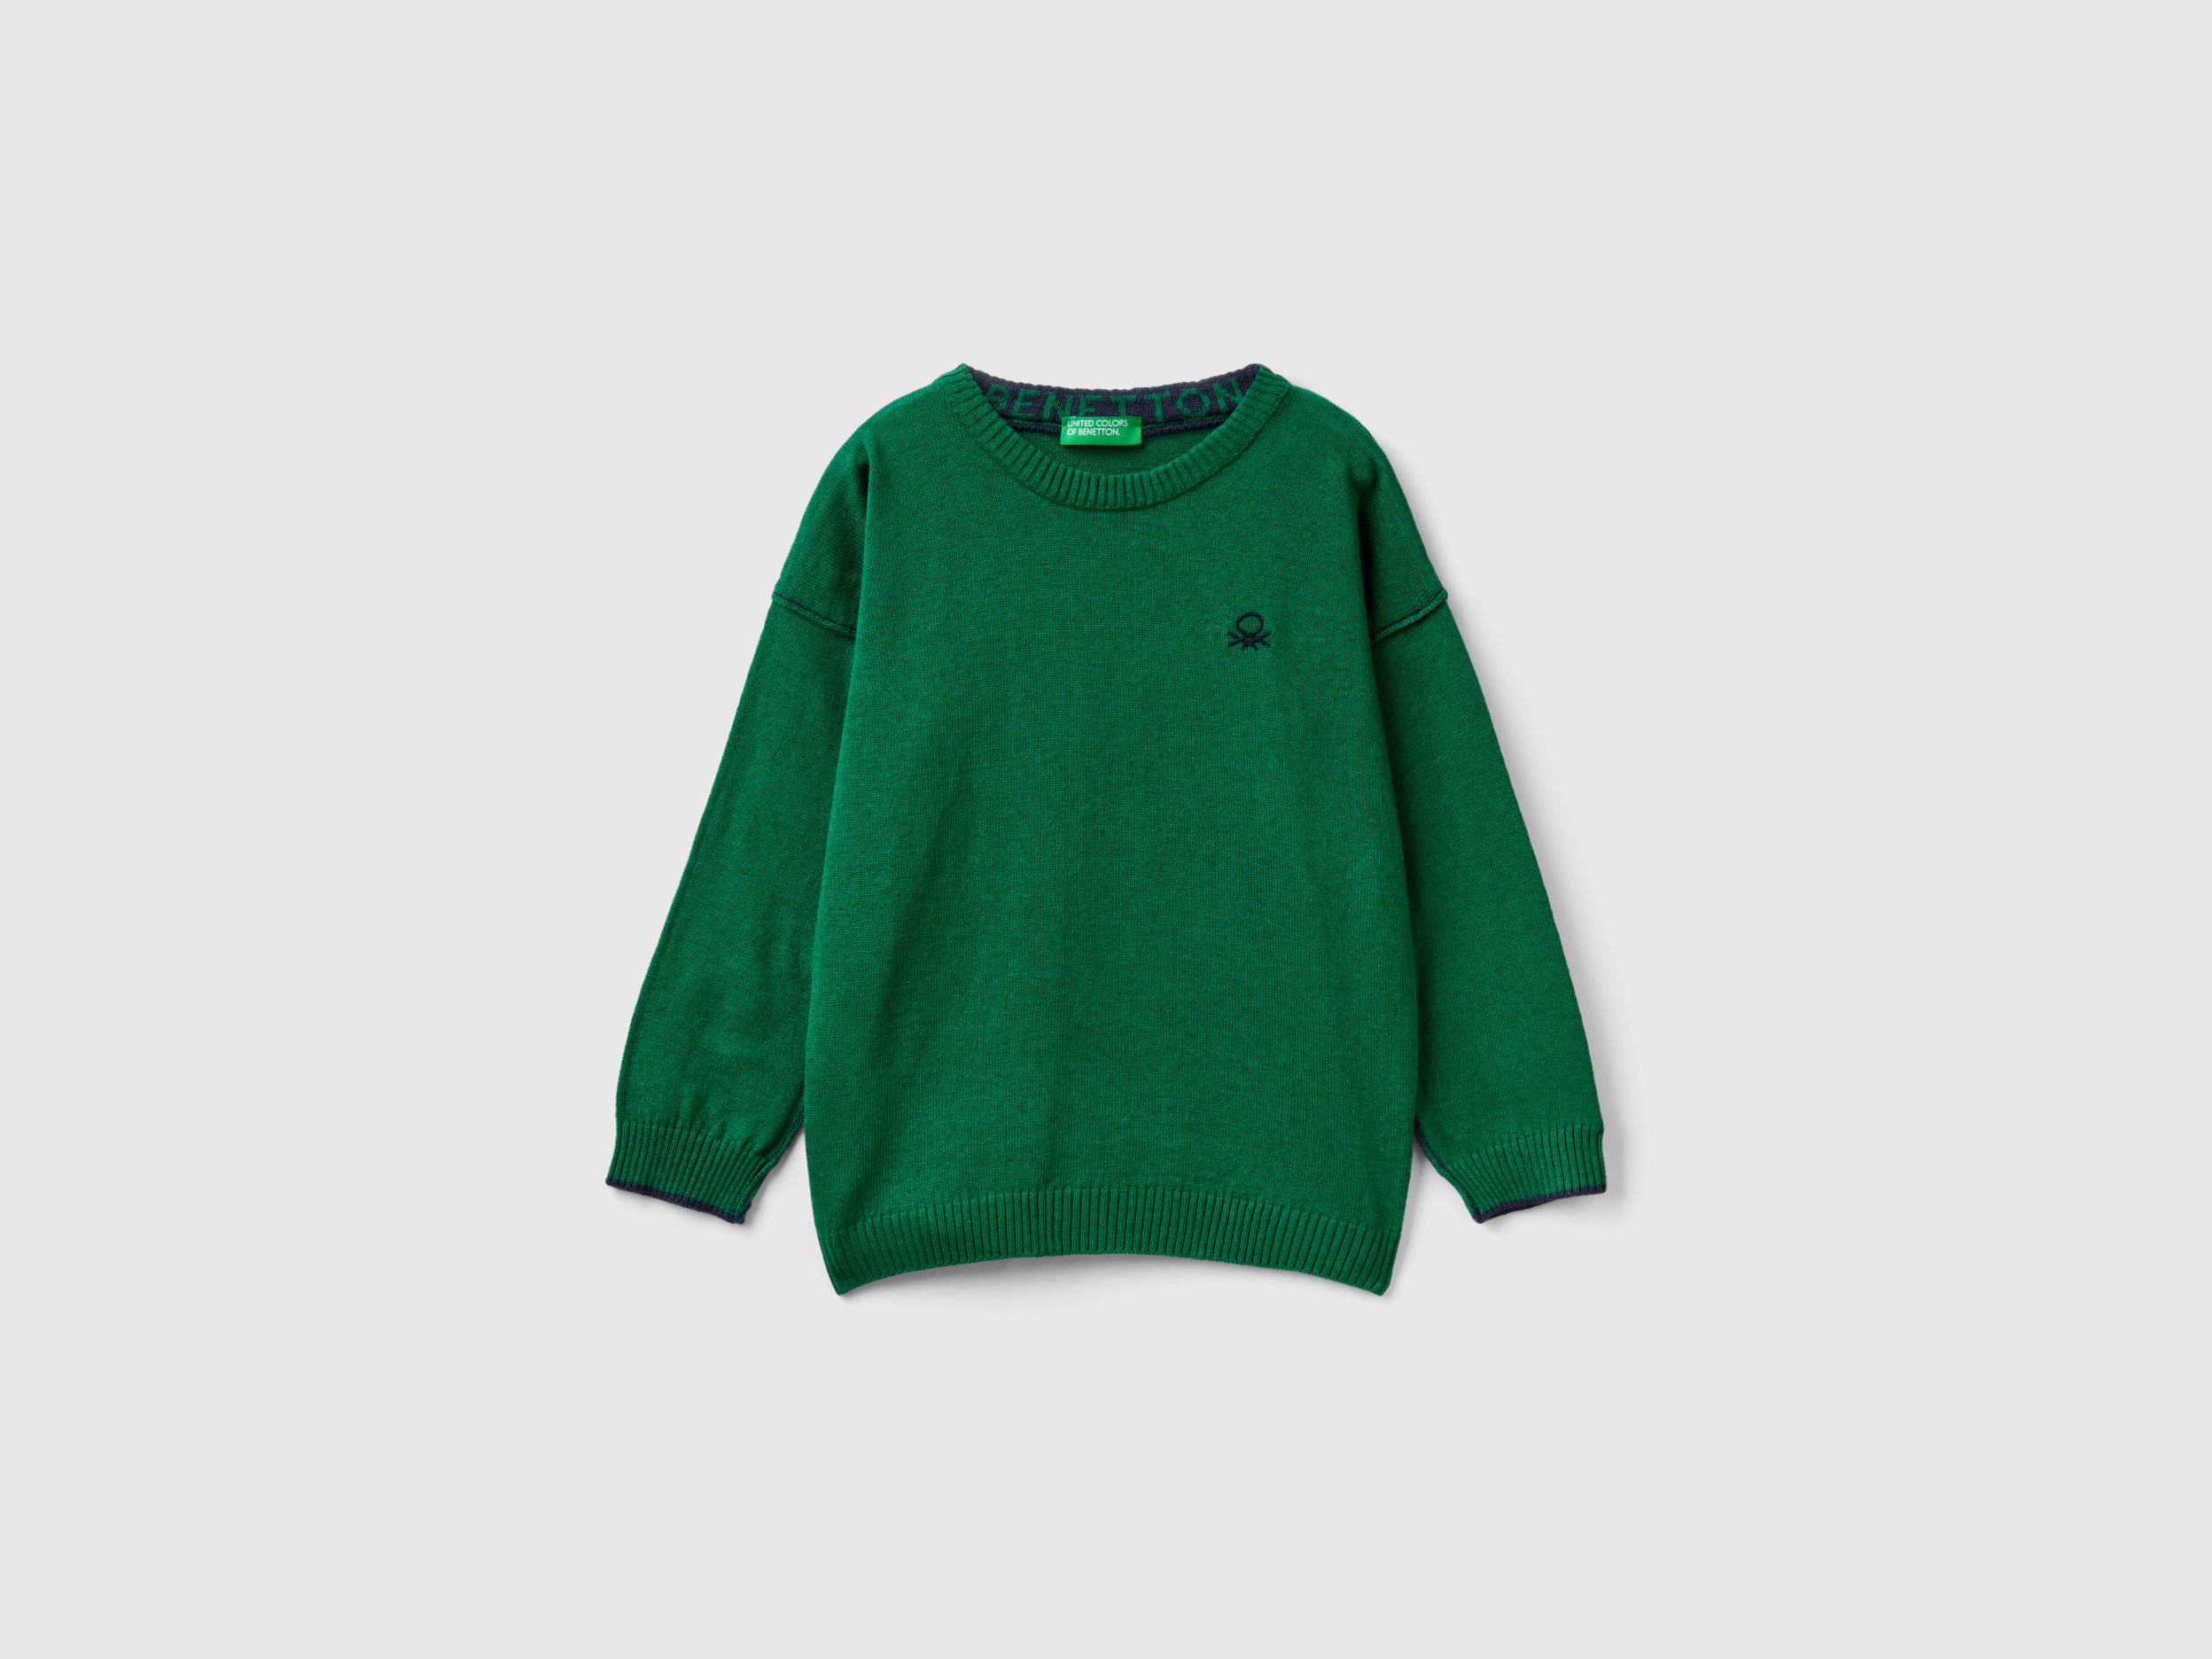 Benetton, Crew Neck Sweater With Embroidery, size 12-18, Green, Kids